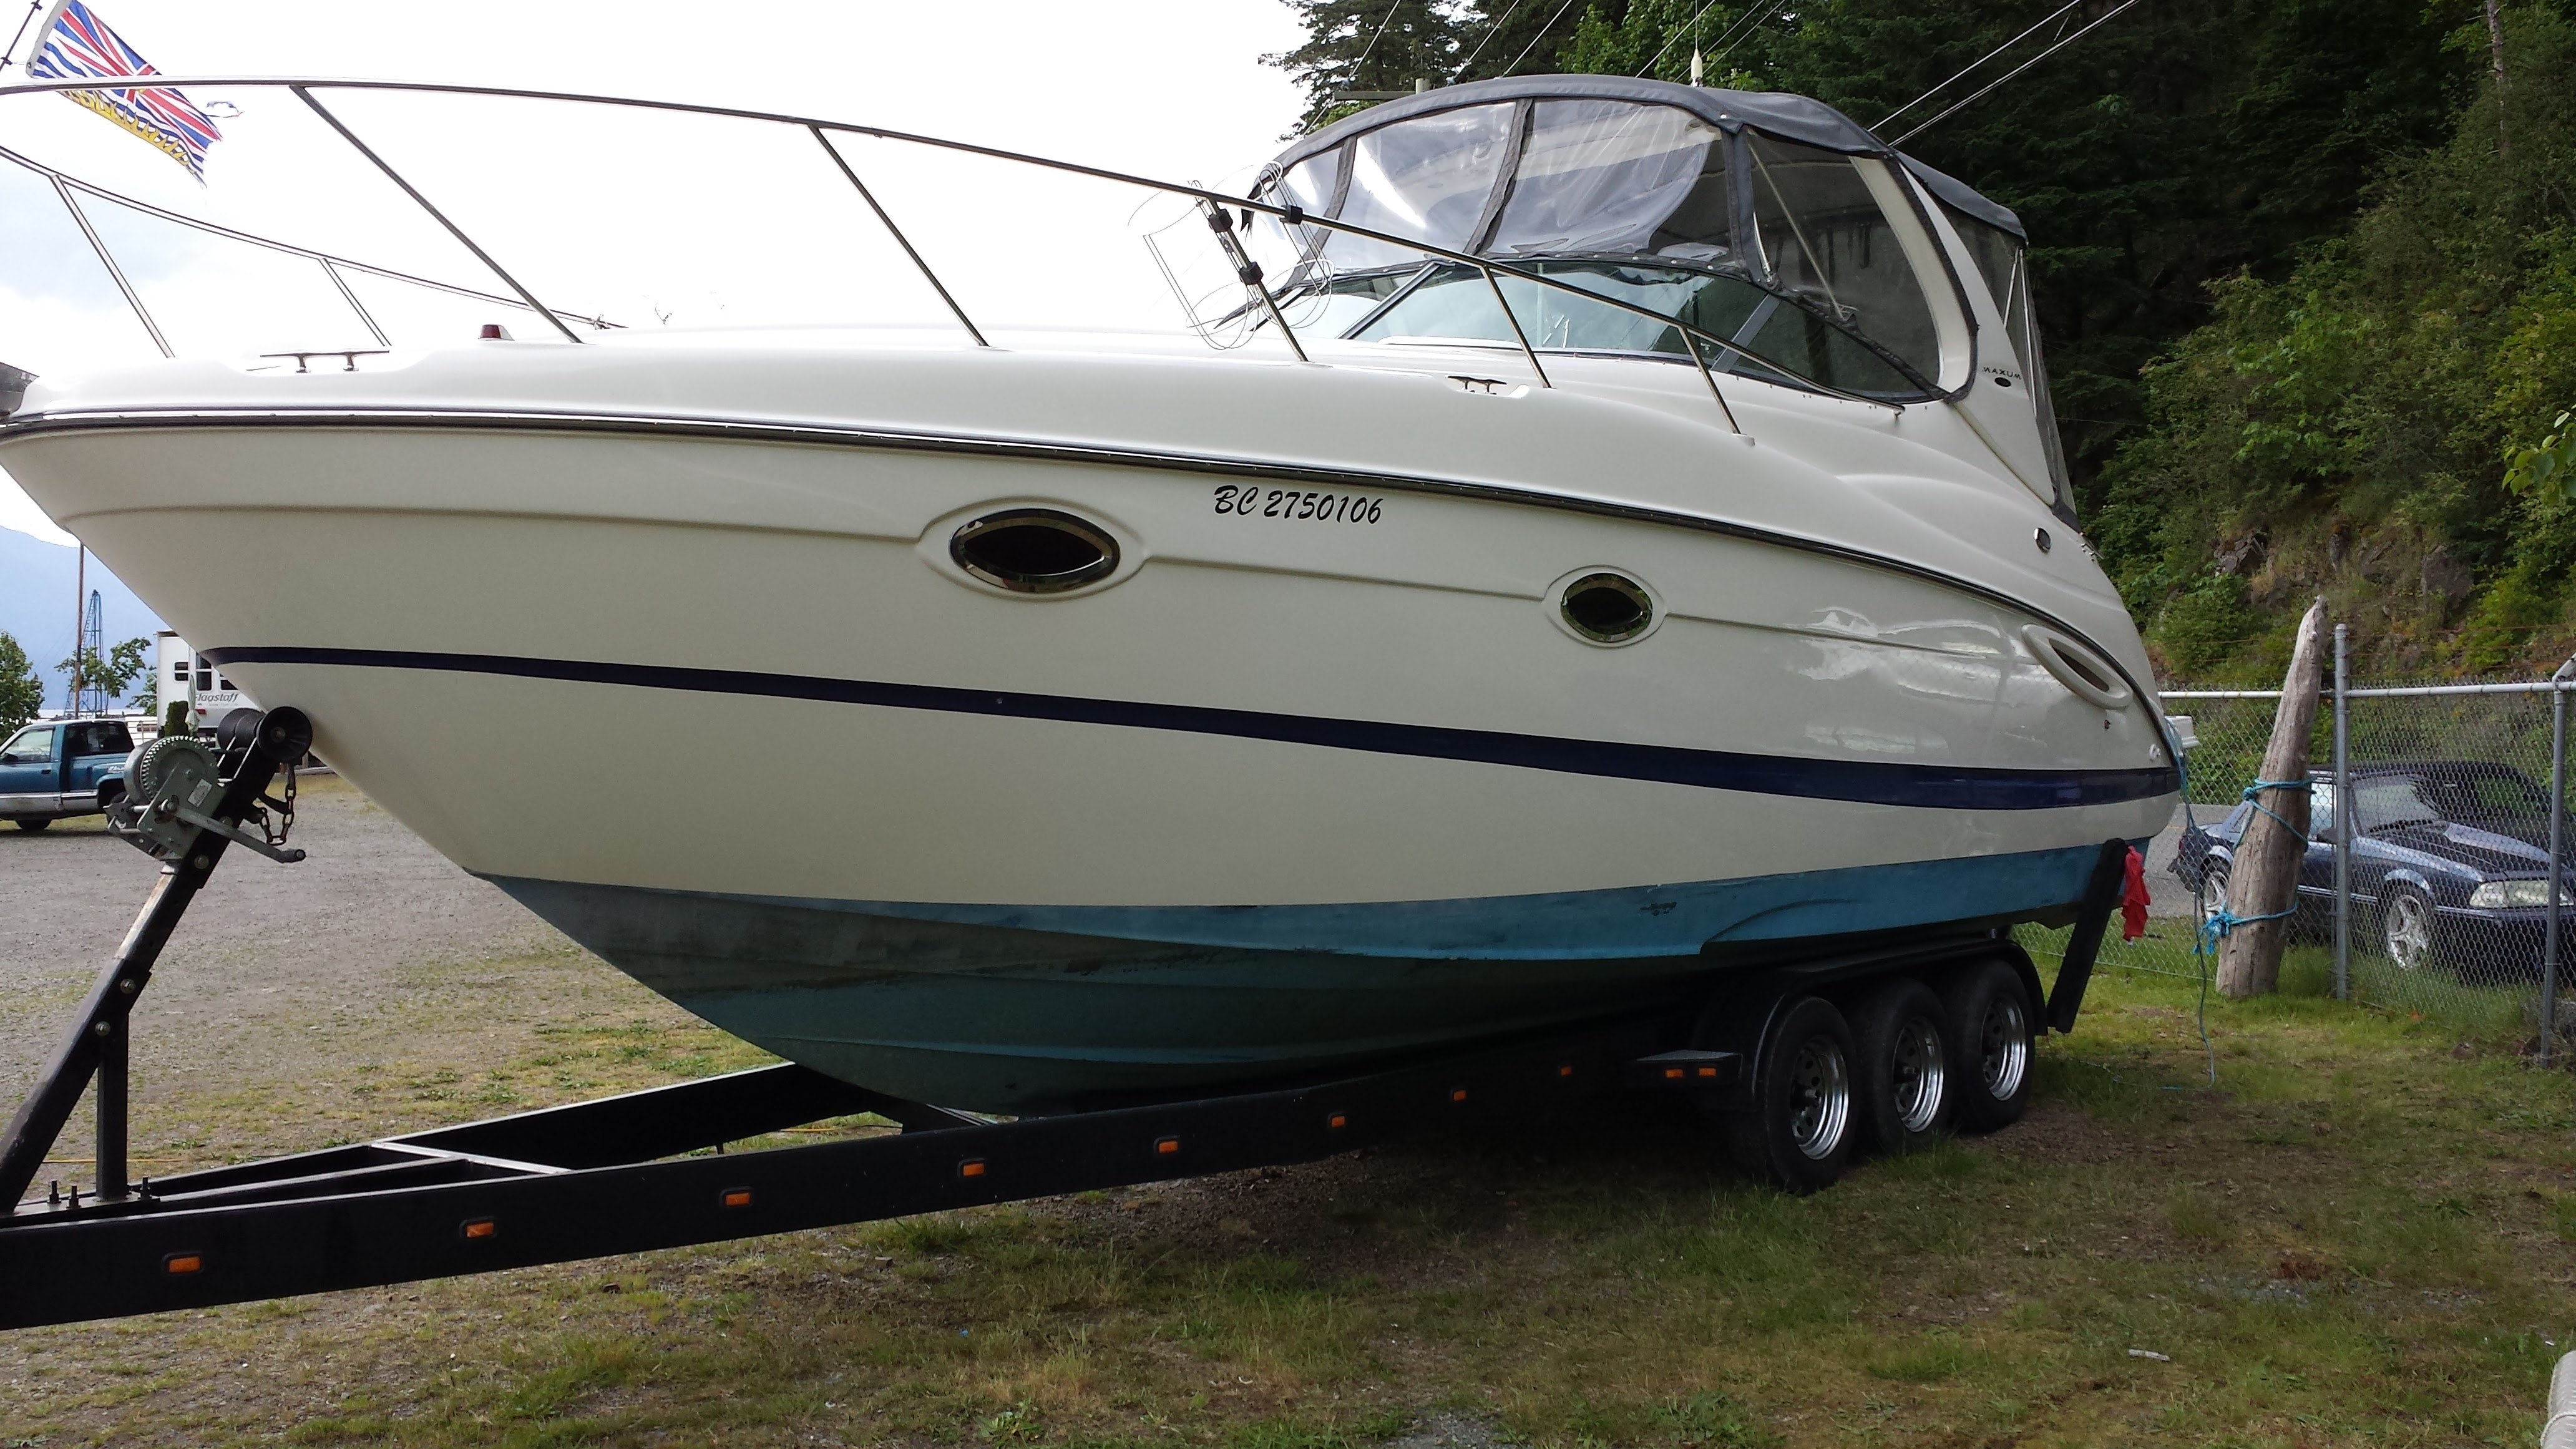 Boat insurance claim repair, and complete detailing maintenance service at Harrison Hot Springs for a Chilliwack BC customer from MRV Marine Services.